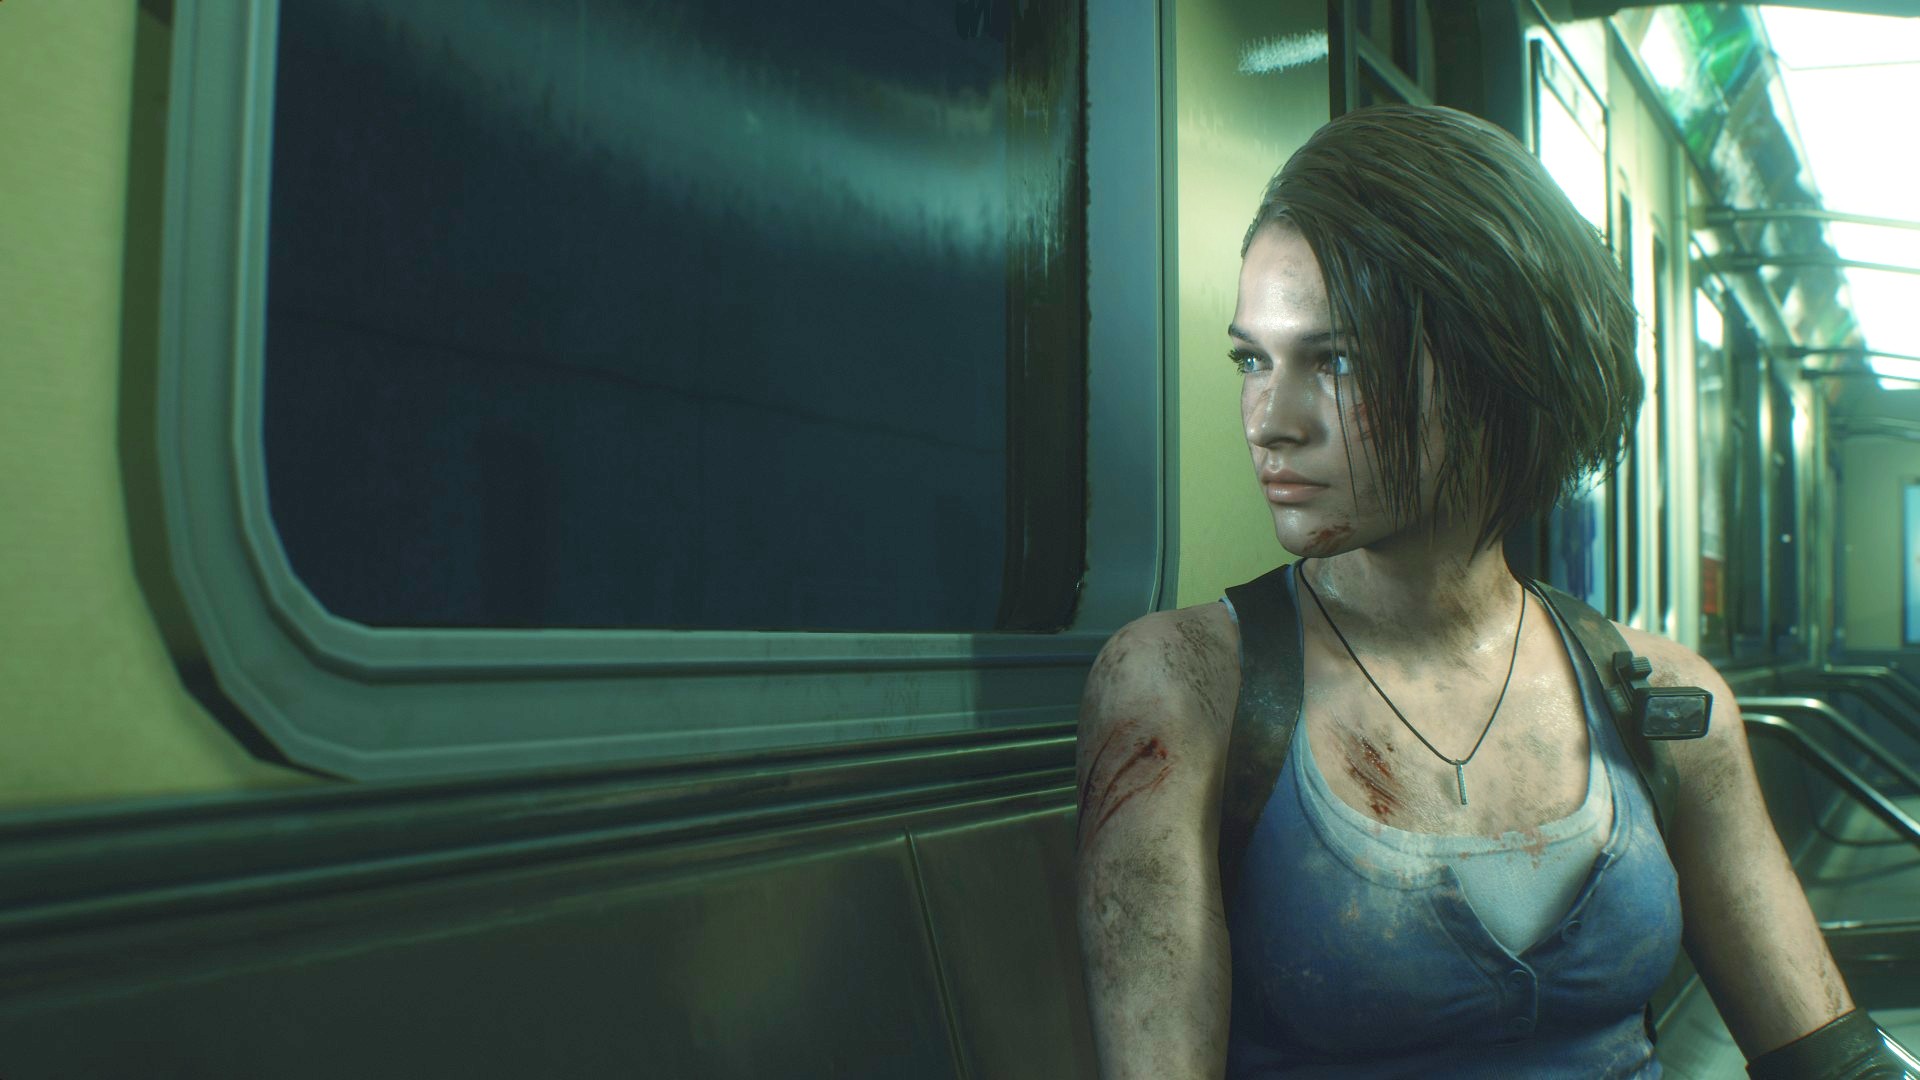 Resident Evil 3 Remake is good: Jill Valentine in a subway car from Capcom survival horror game Resident Evil 3 Remake